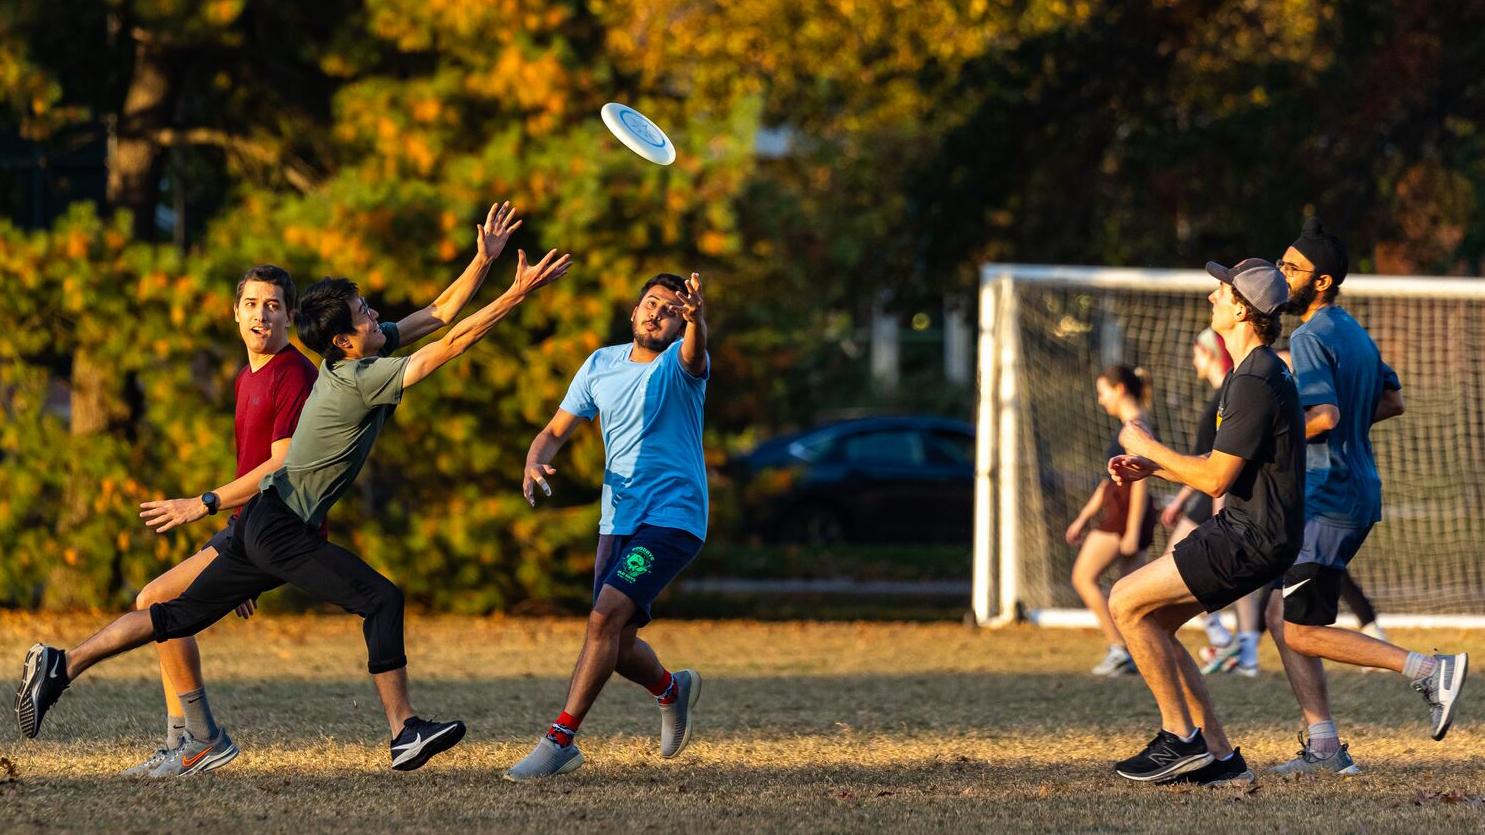 A group of students attempt to catch a frisbee while playing outdoors